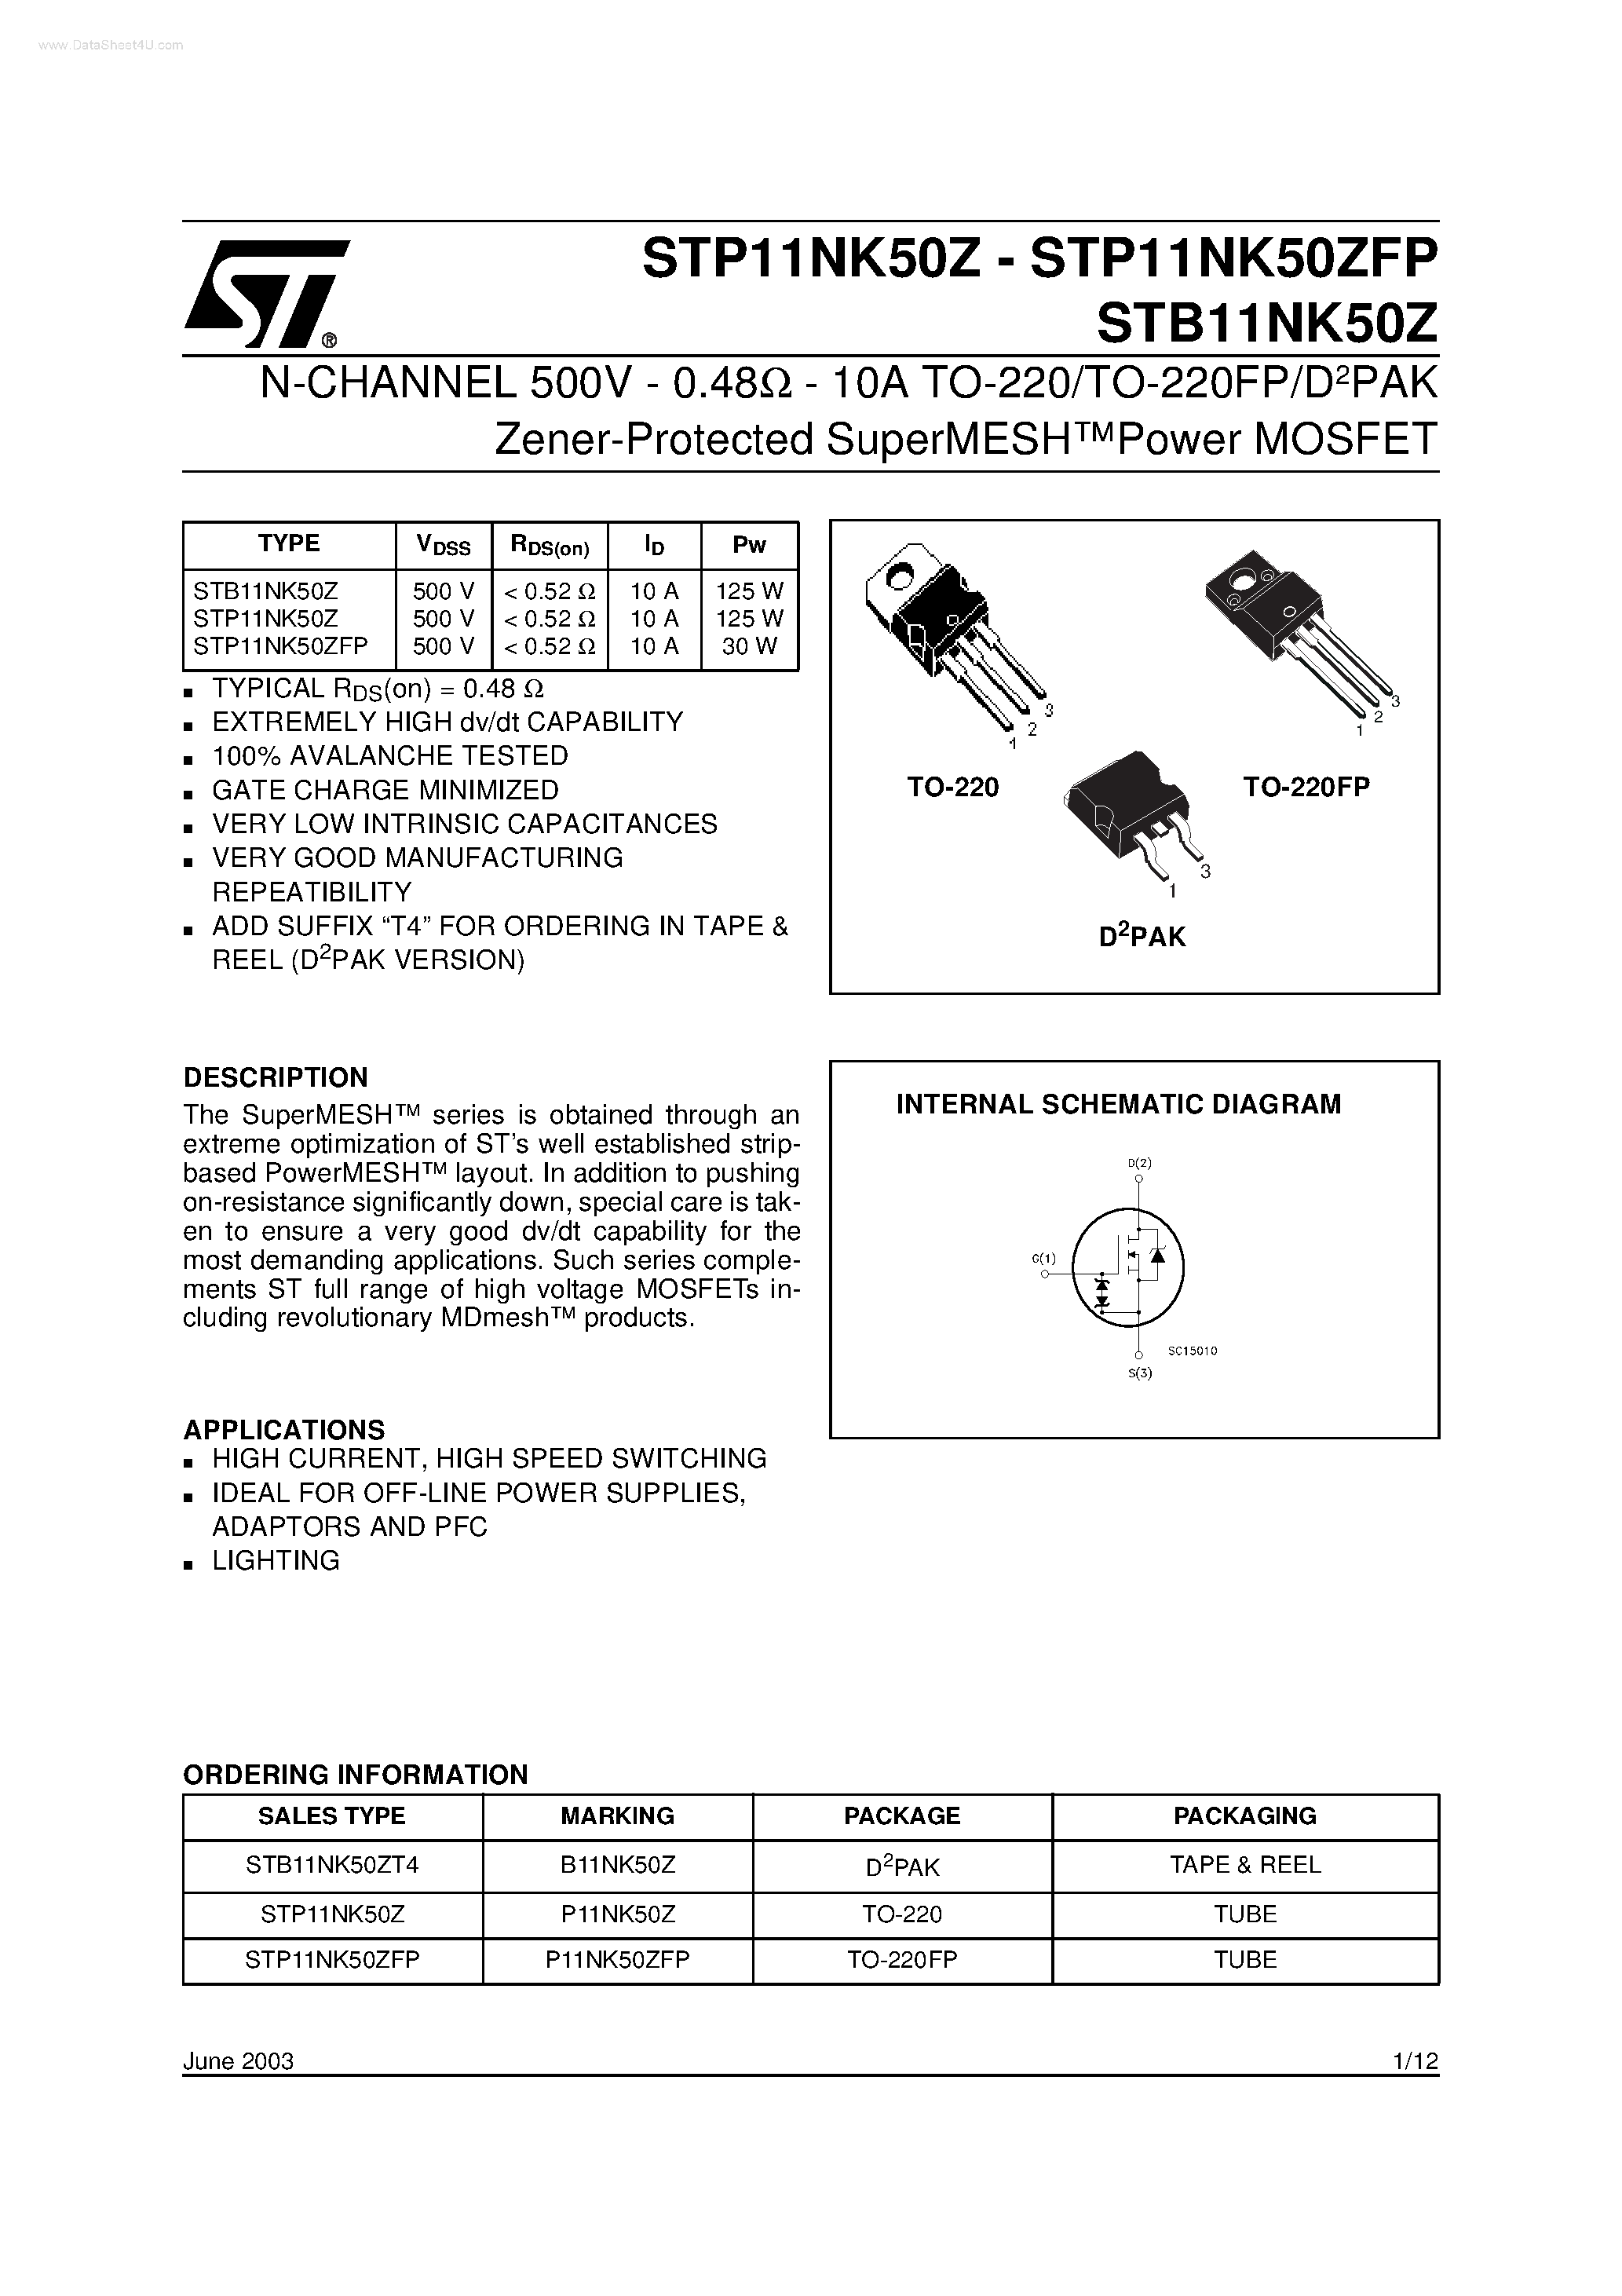 Datasheet STP11NK50Z - N-CHANNEL Power MOSFET page 1